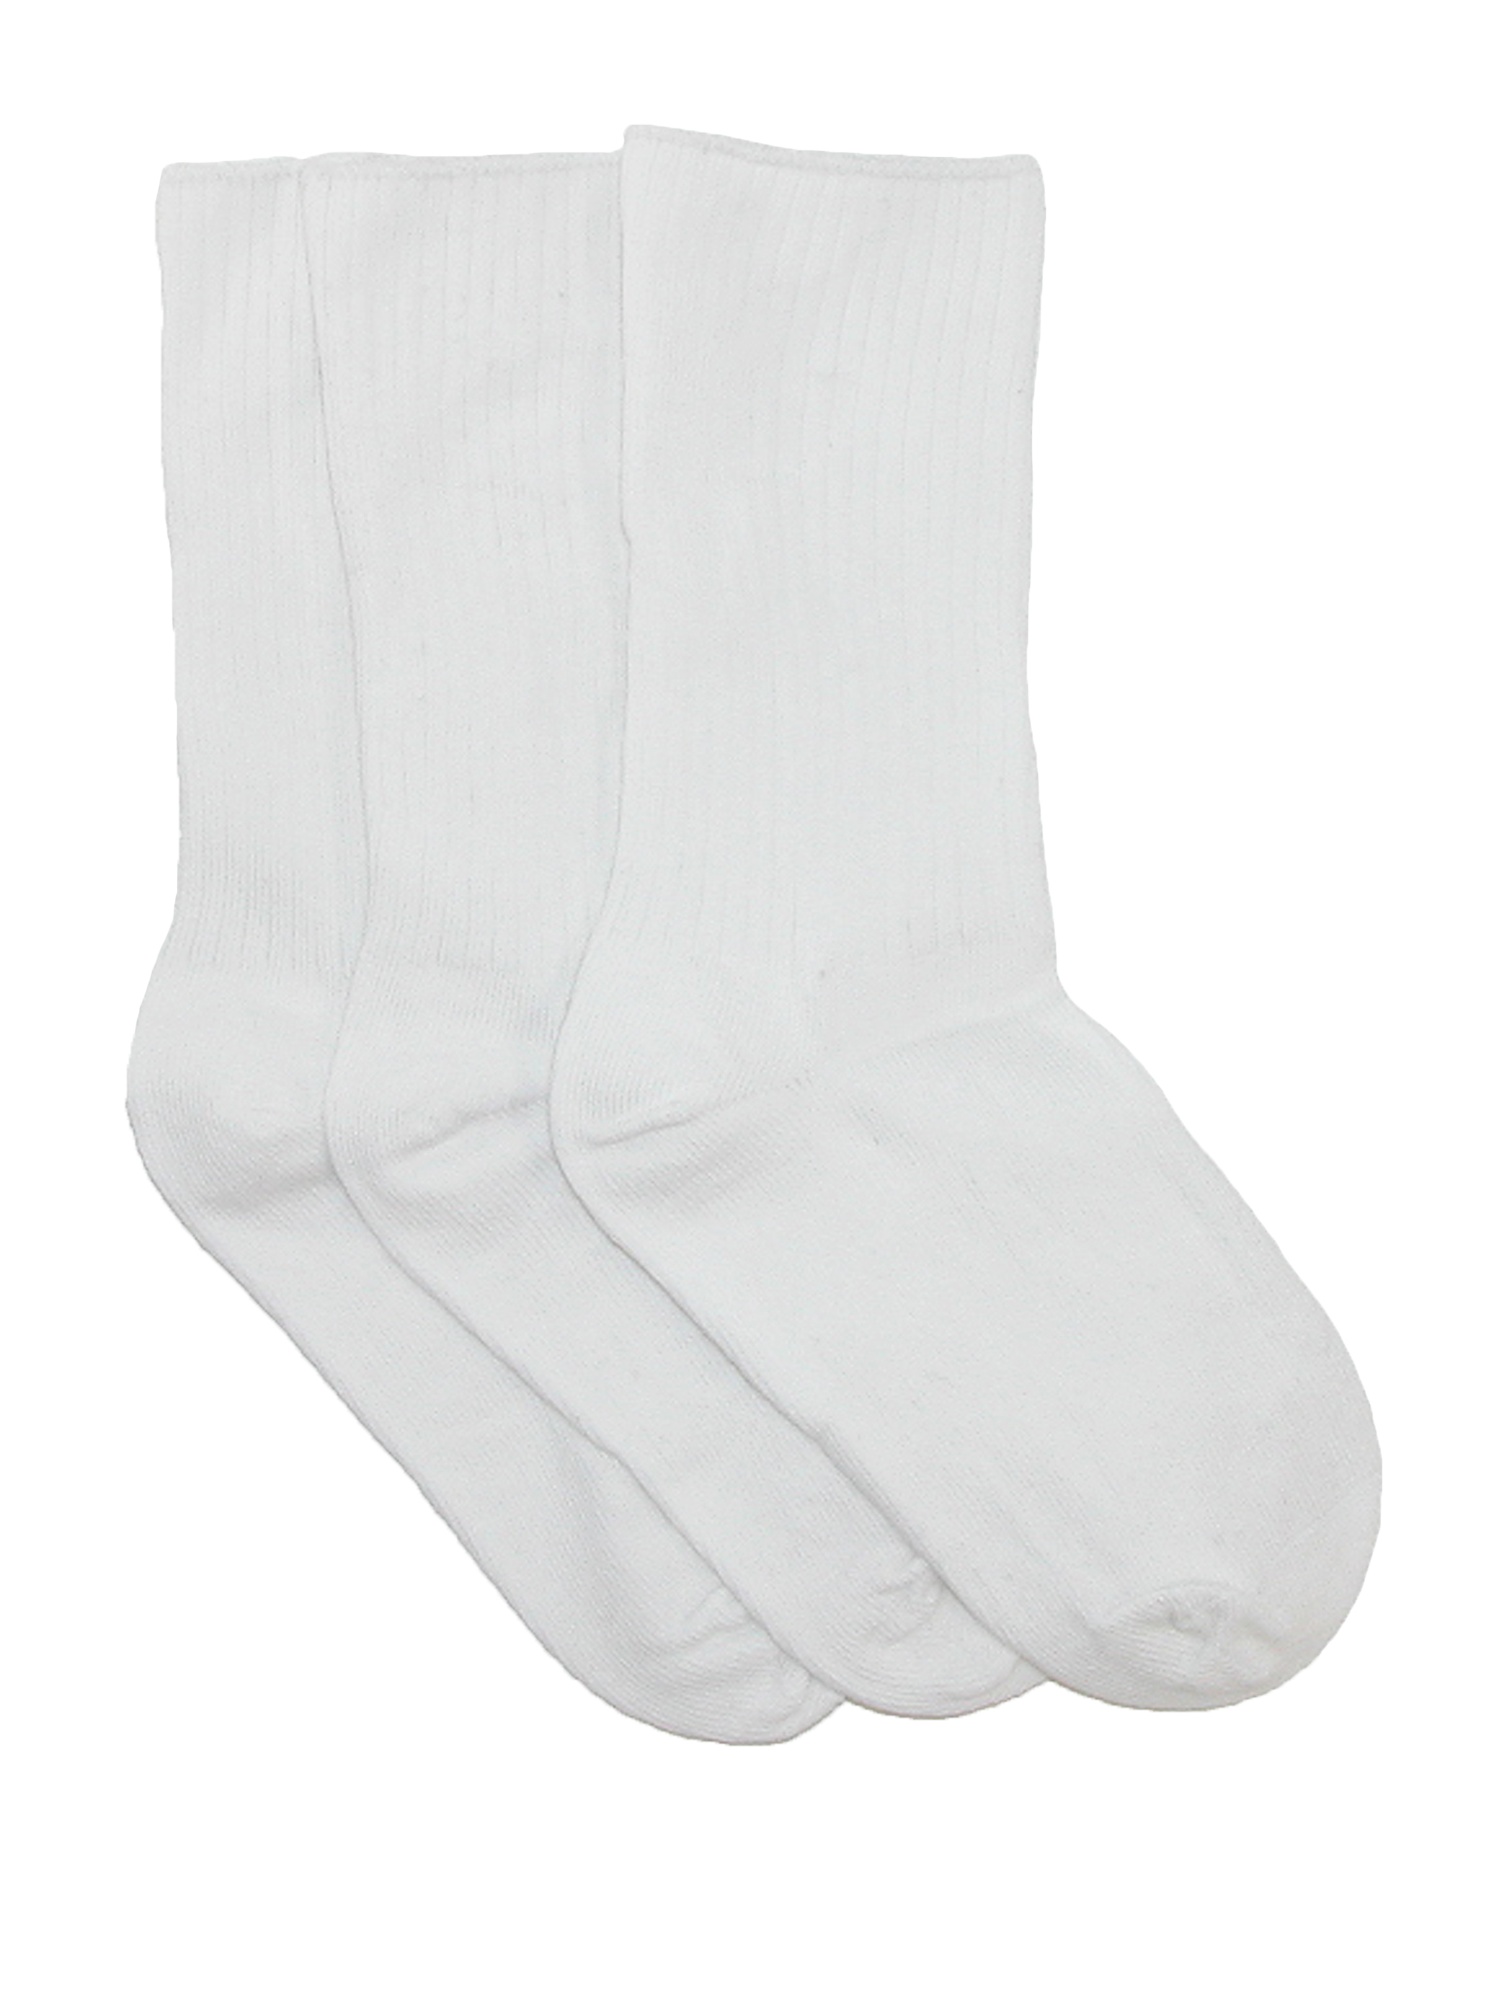 Kids' Cotton Seamless Toe Casual Crew Sock (Pack of 3) - image 1 of 3